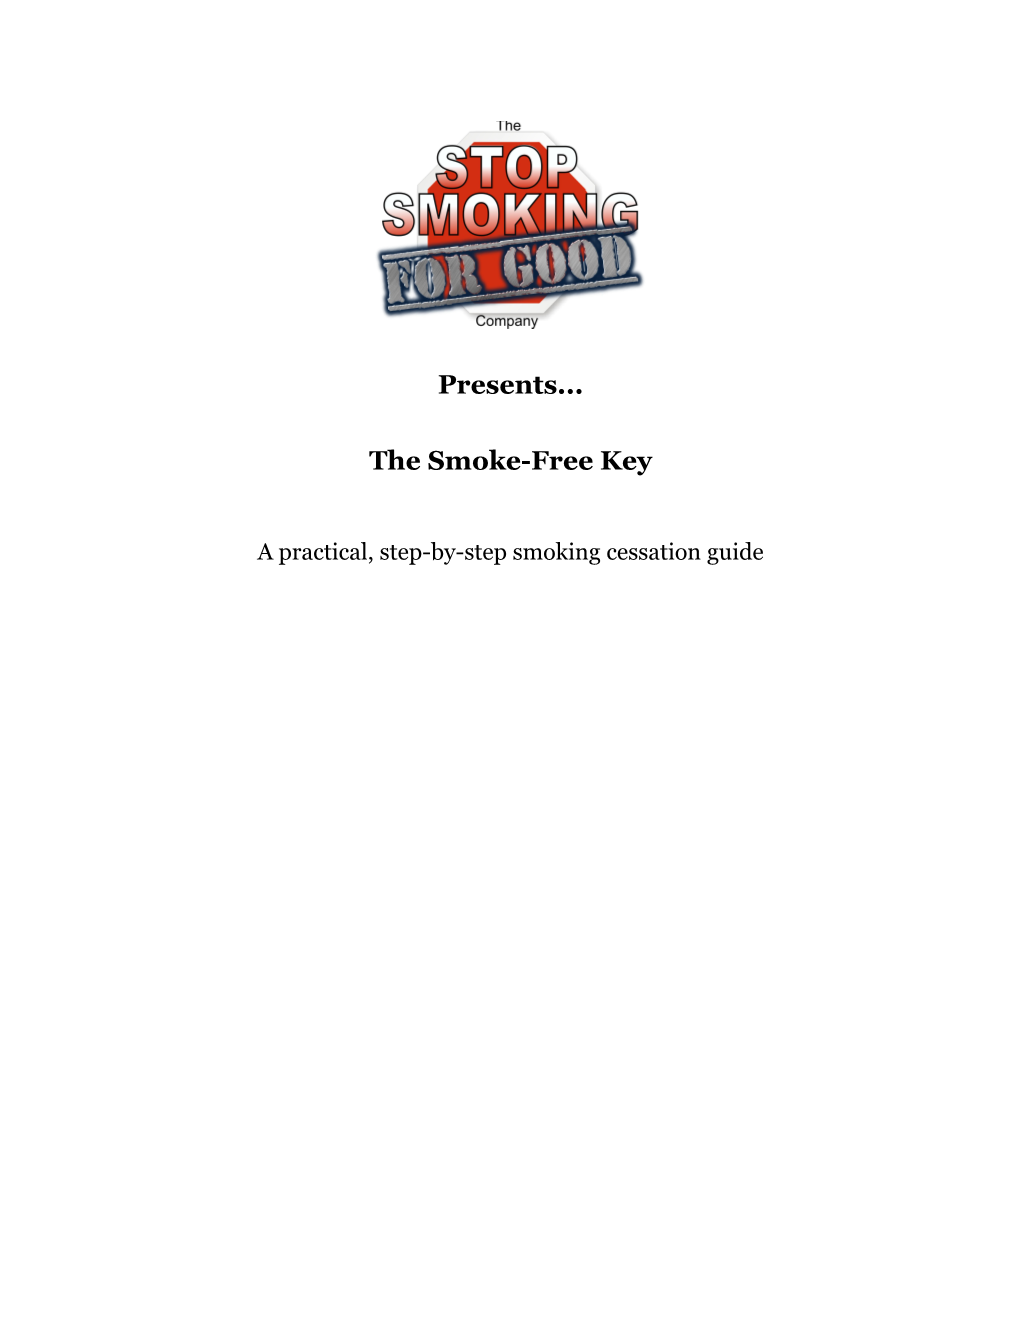 The Smoke-Free Key Part 1 of 6 - Introduction